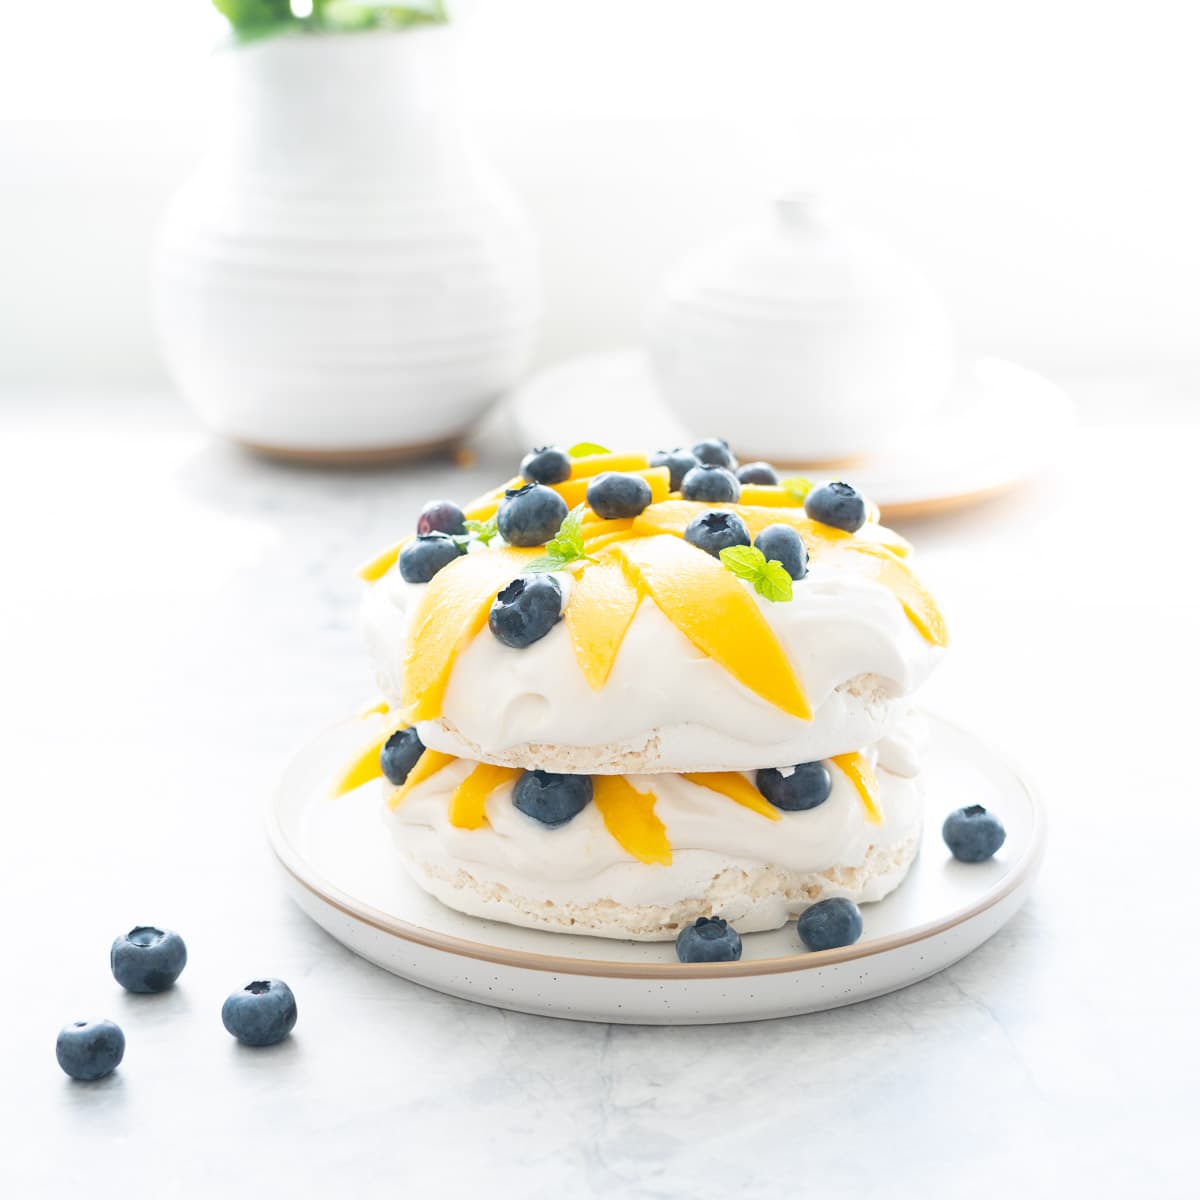 A two layer pavlova topped and filled with whipped cream, sliced mango, blueberries and mint leaves